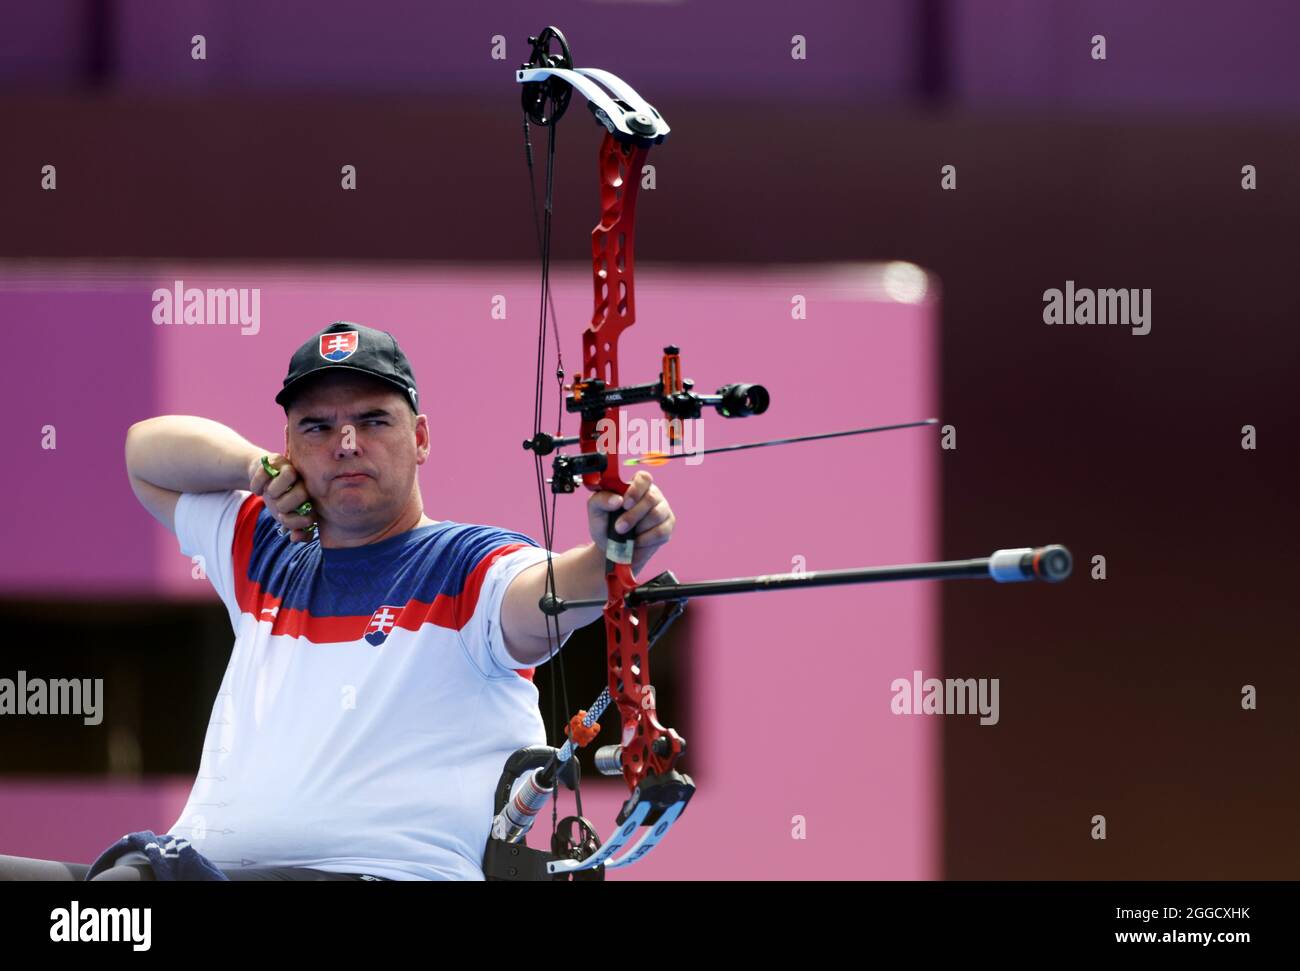 Tokyo Paralympic Games Archery Men S Individual Compound Open Bronze Medal Yumenoshima Archery Field Tokyo Japan August 31 21 Marcel Pavlik Of Slovakia In Action Reuters Molly Darlington Stock Photo Alamy